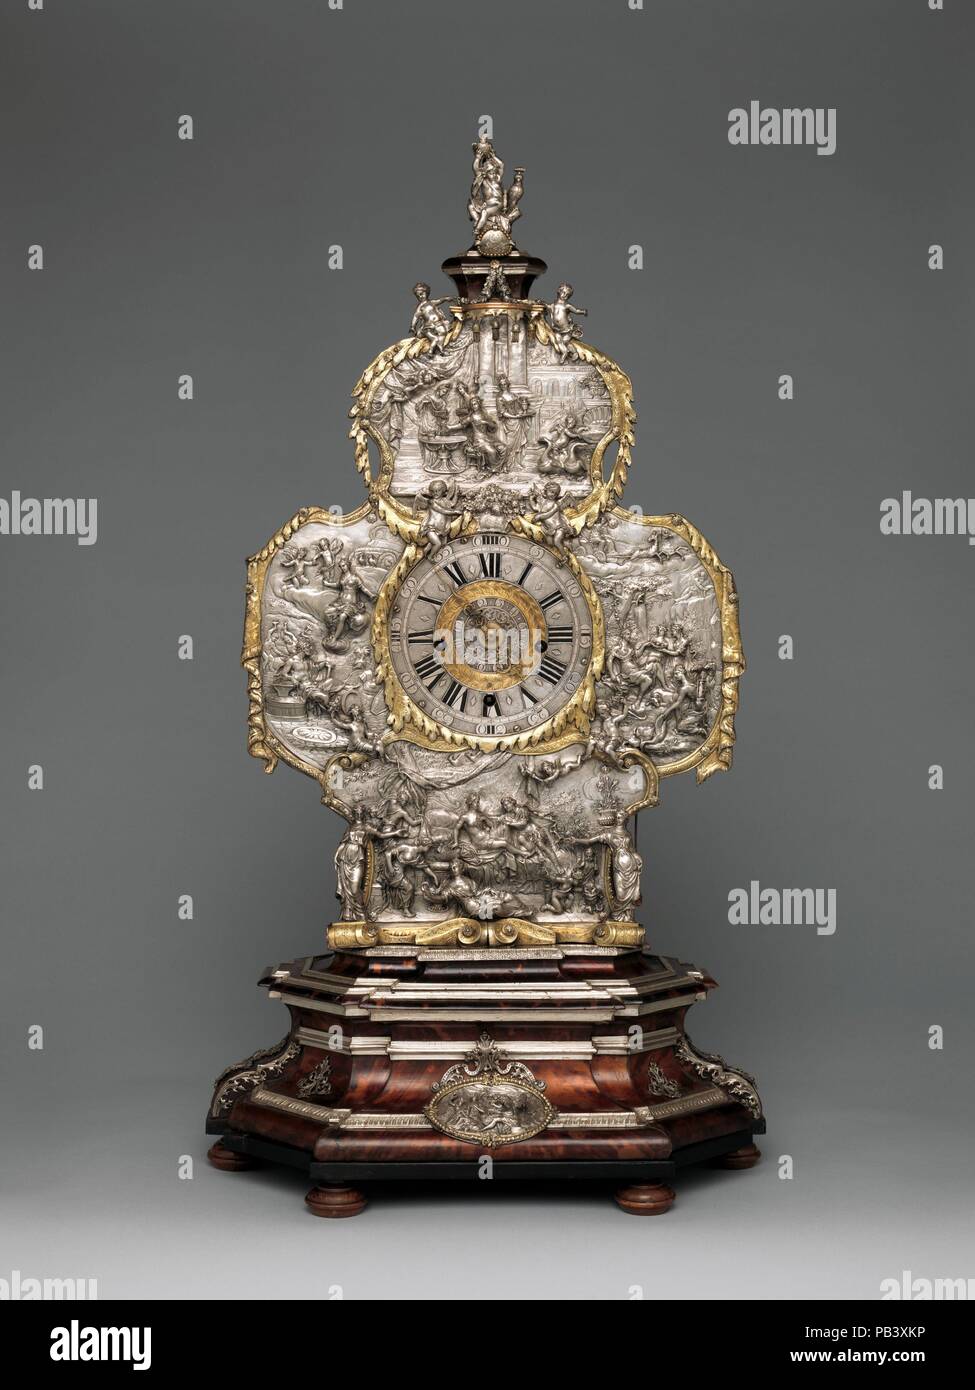 Mantel clock. Culture: German, Augsburg. Dimensions: Overall: 31 3/4 × 17 × 11 1/4 in. (80.6 × 43.2 × 28.6 cm). Maker: Clockmaker: Franz Xavier Gegenreiner (German, active 1760-70); Case maker: Johann Andreas Thelot (German, 1655-1734). Date: case ca. 1710, movement ca. 1760-70.  Thelot's ancestors were French Huguenots who emigrated from Dijon in 1585. He became one of the most celebrated goldsmiths in Augsburg, a city renowned for its metalwork in silver and silver gilt. The reliefs on this case depict the goddess Venus at her toilette (top), Venus and Diana (right), Venus and Mars (bottom), Stock Photo